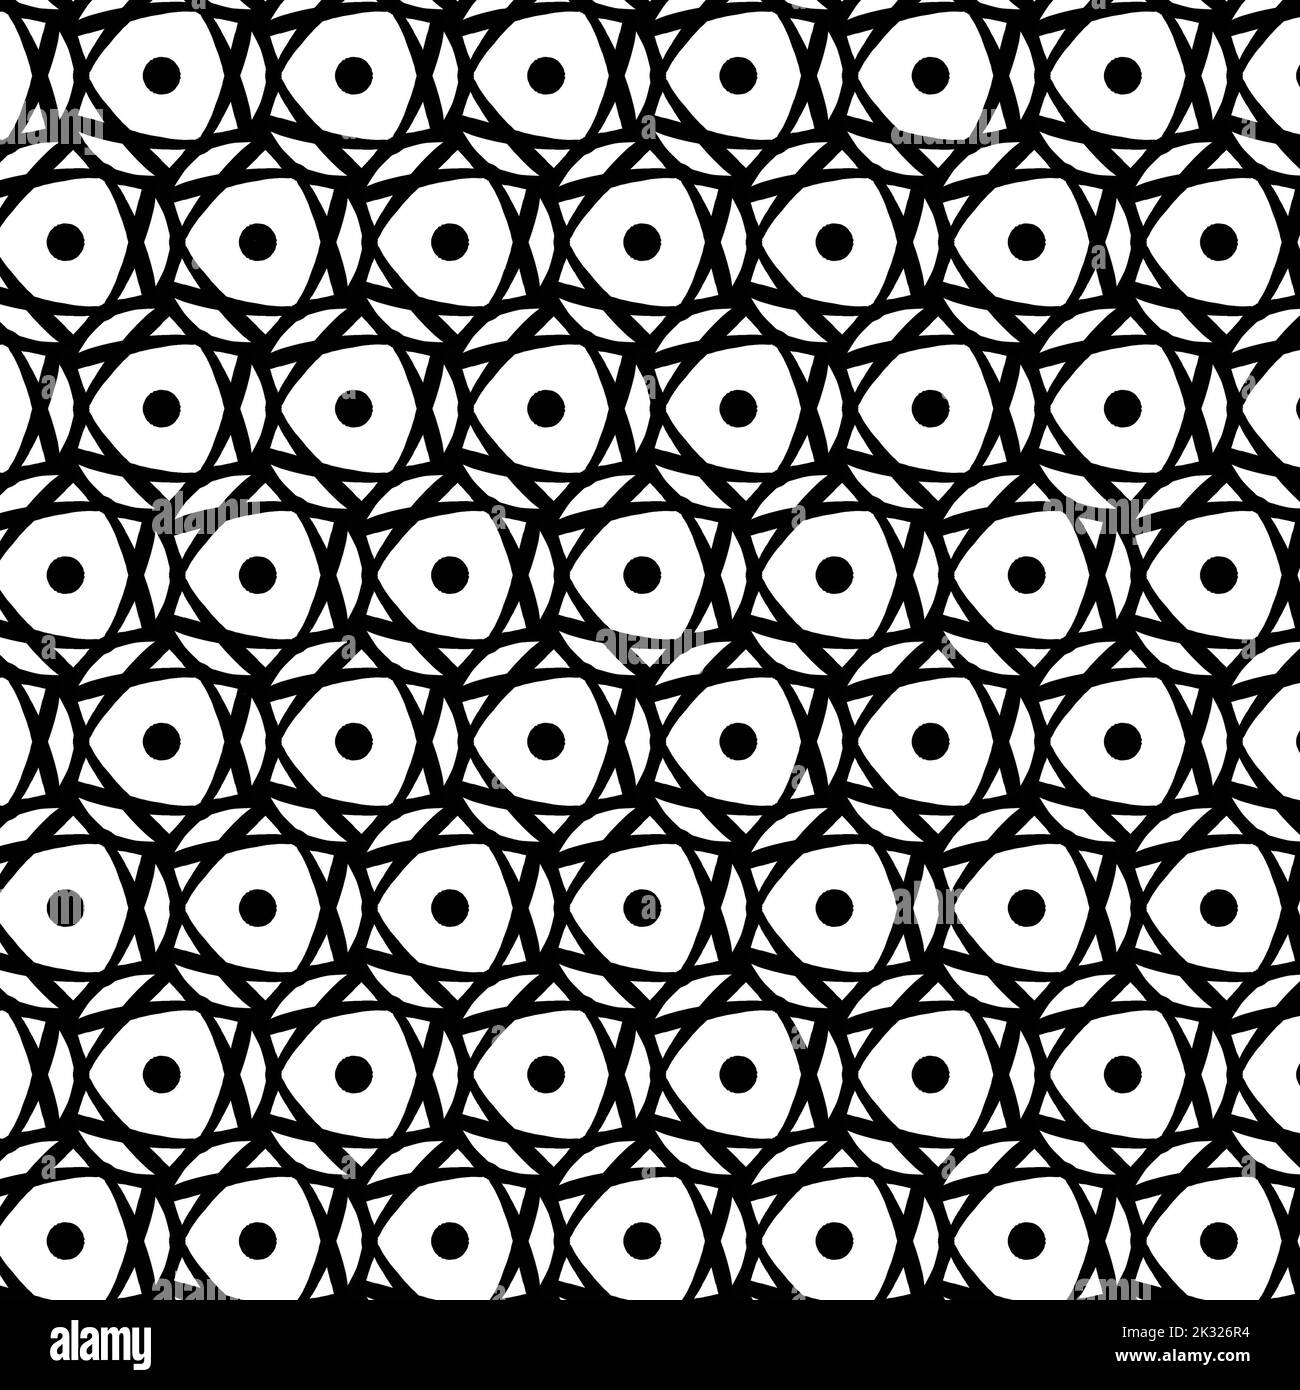 Seamless pattern graphic of pineapple's texture, black and white color. Stock Photo